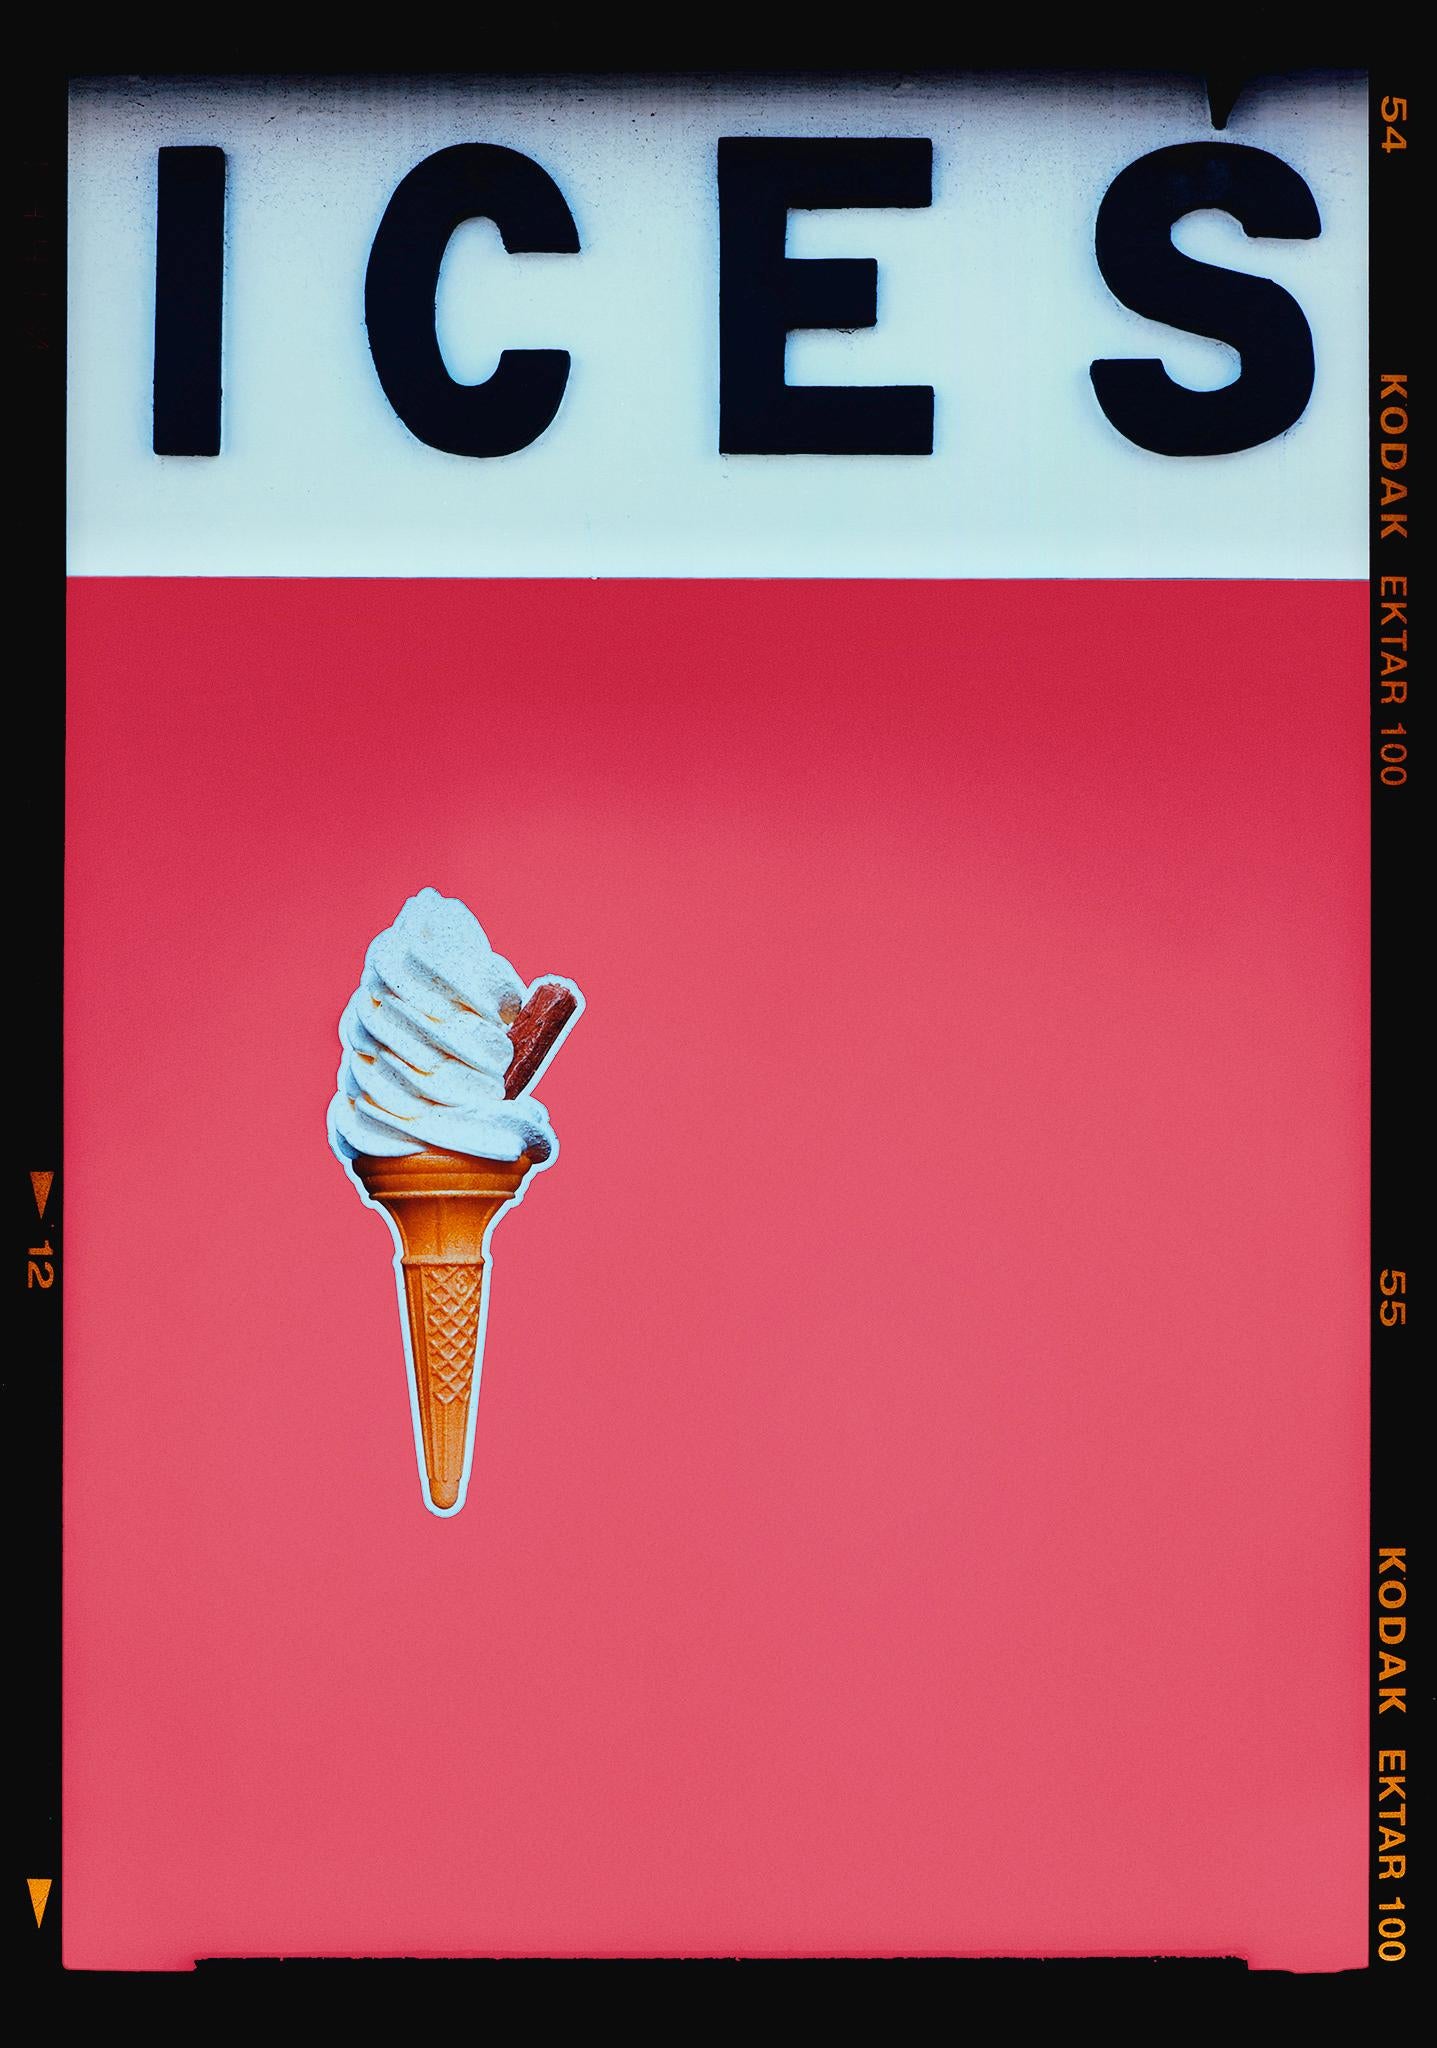 Richard Heeps Color Photograph - Ices (Coral), Bexhill-on-Sea - British seaside color photography